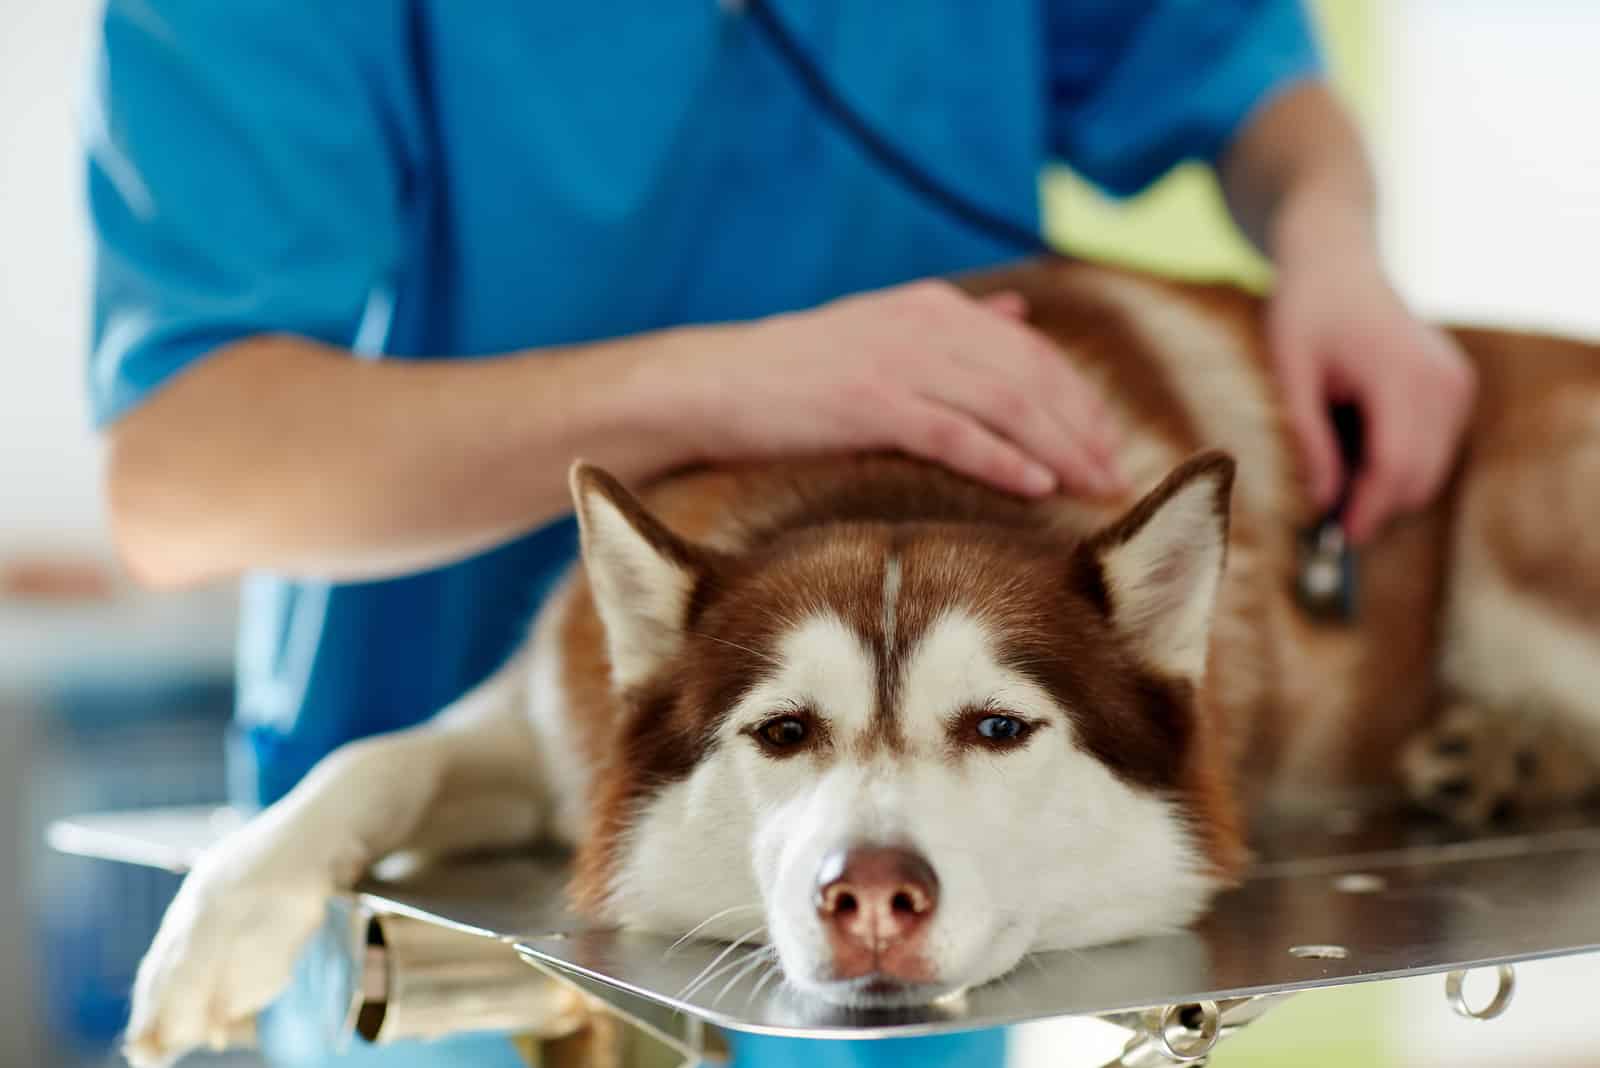 When To Put Down A Dog With Seizures? A Difficult Decision